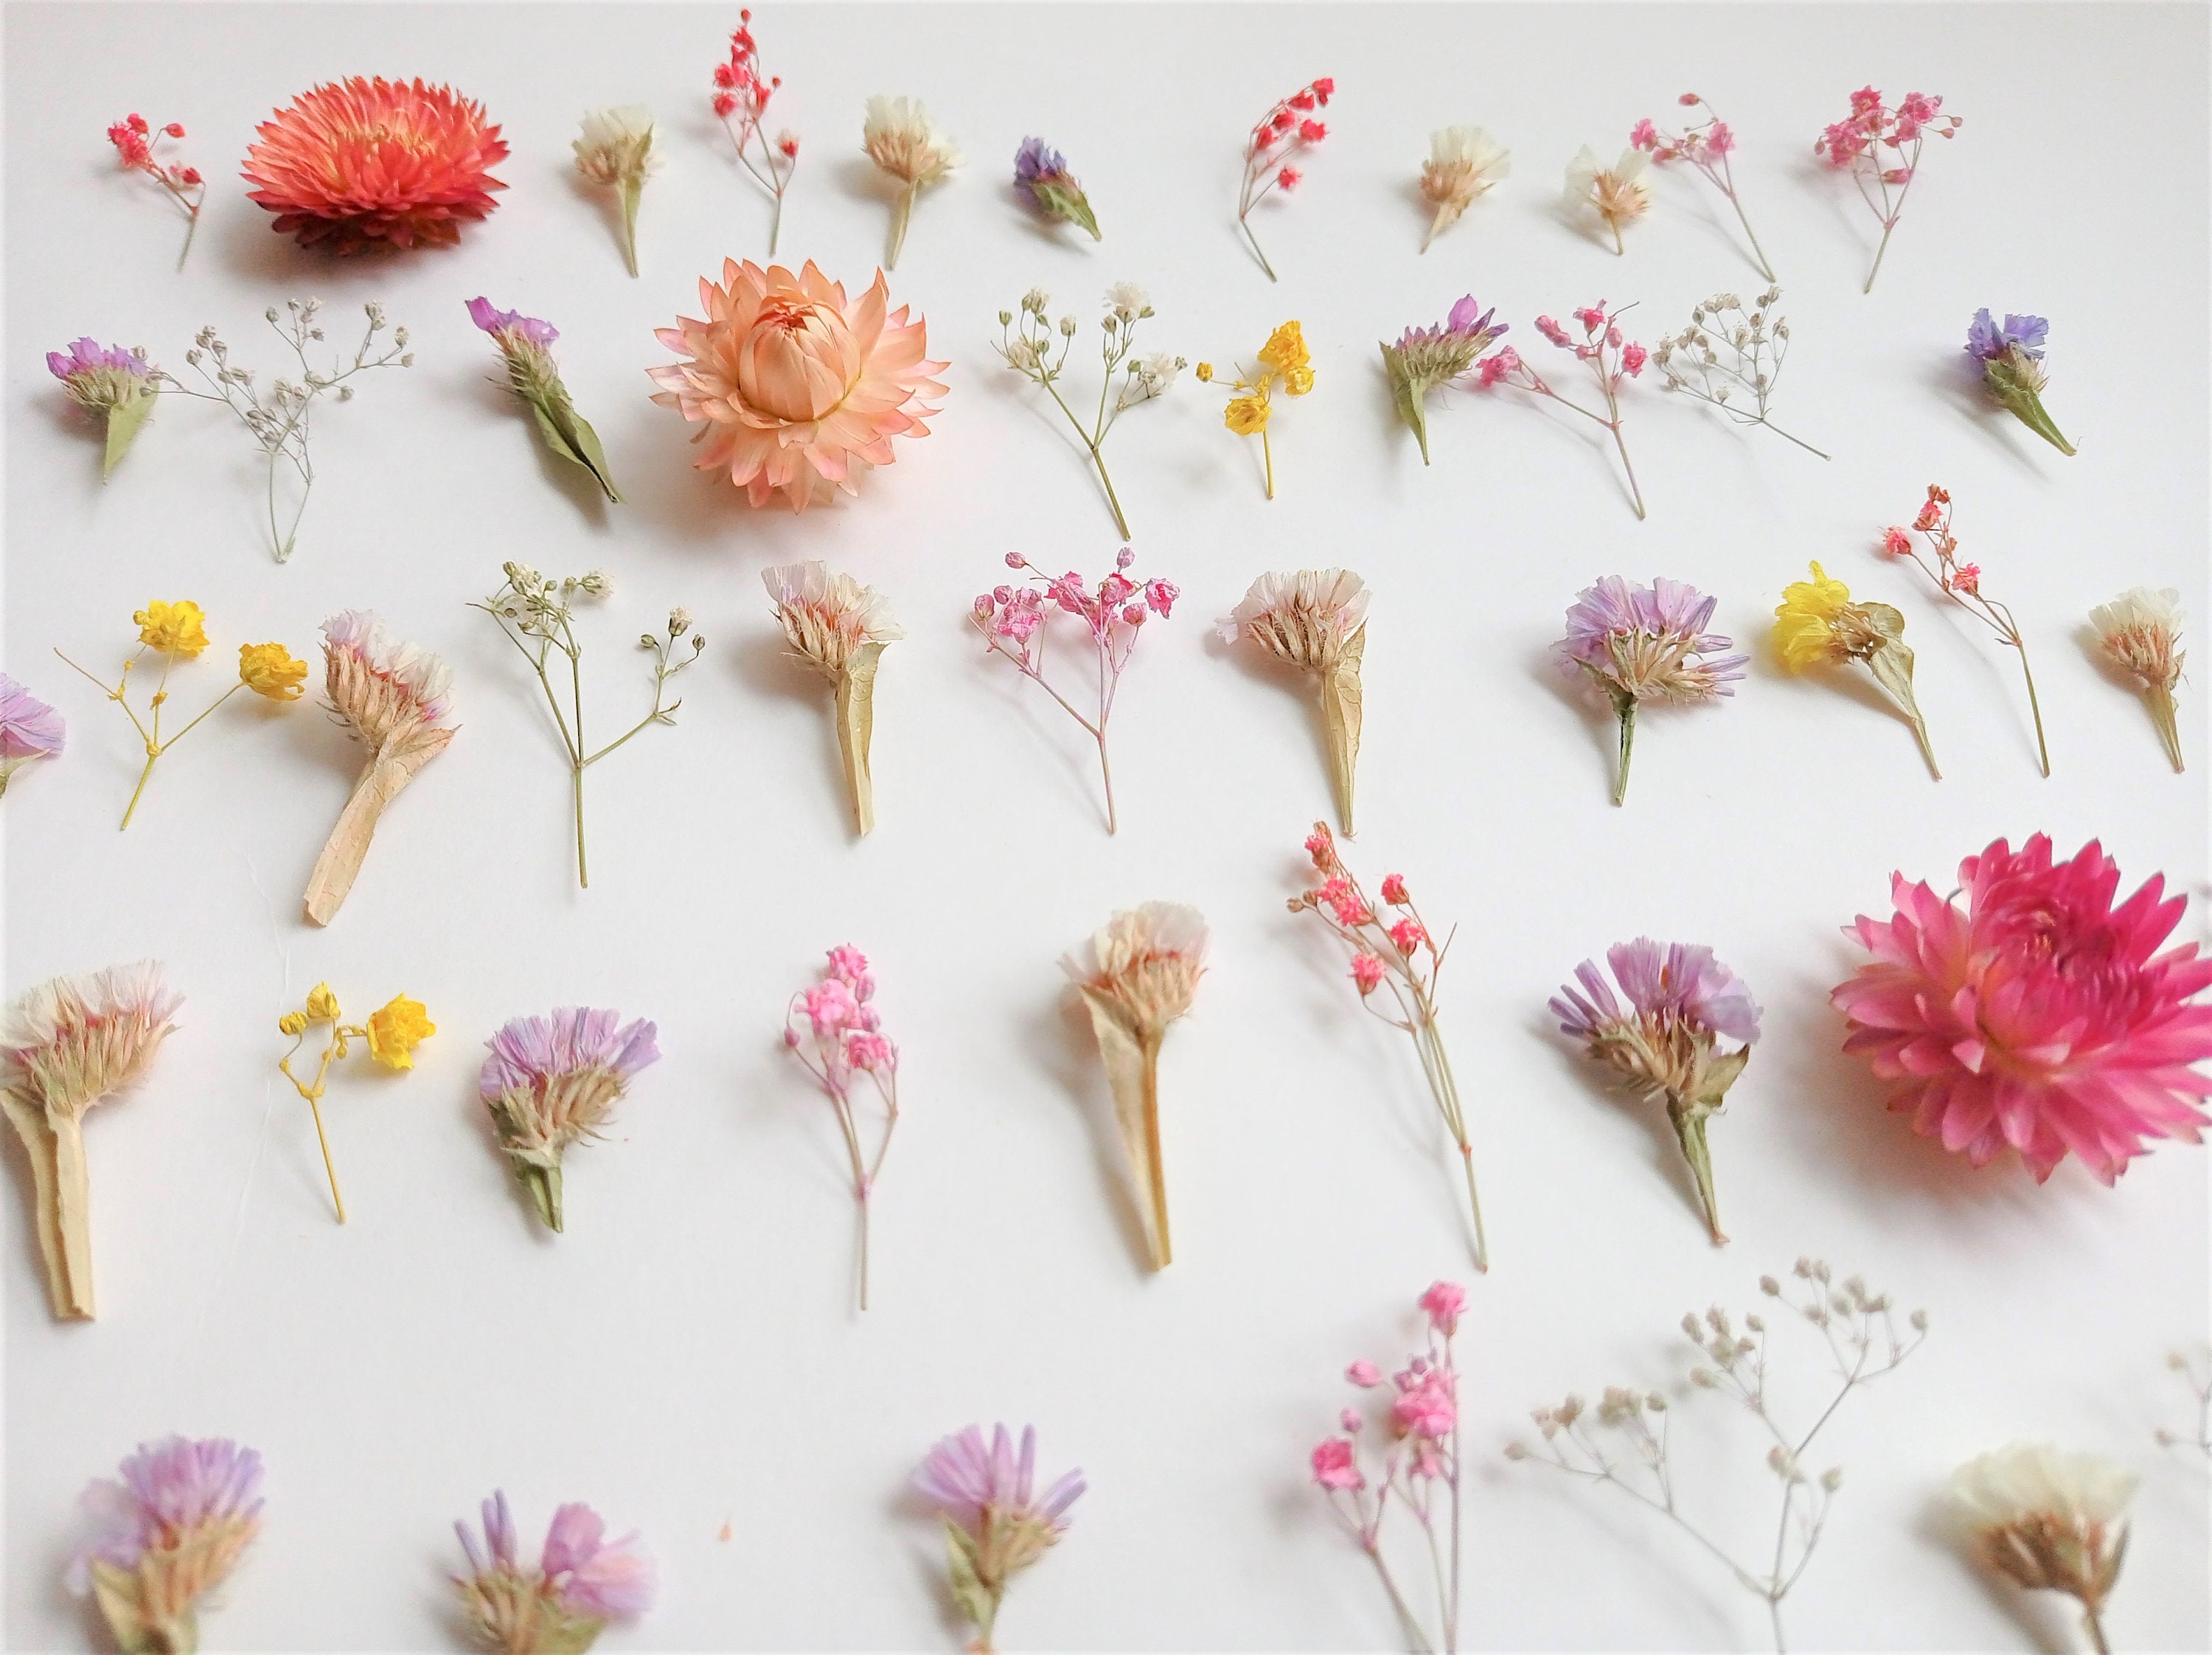 Dried Tiny Flowers 45pcs for Resin, Mini Dried Flowers for Rcrafts